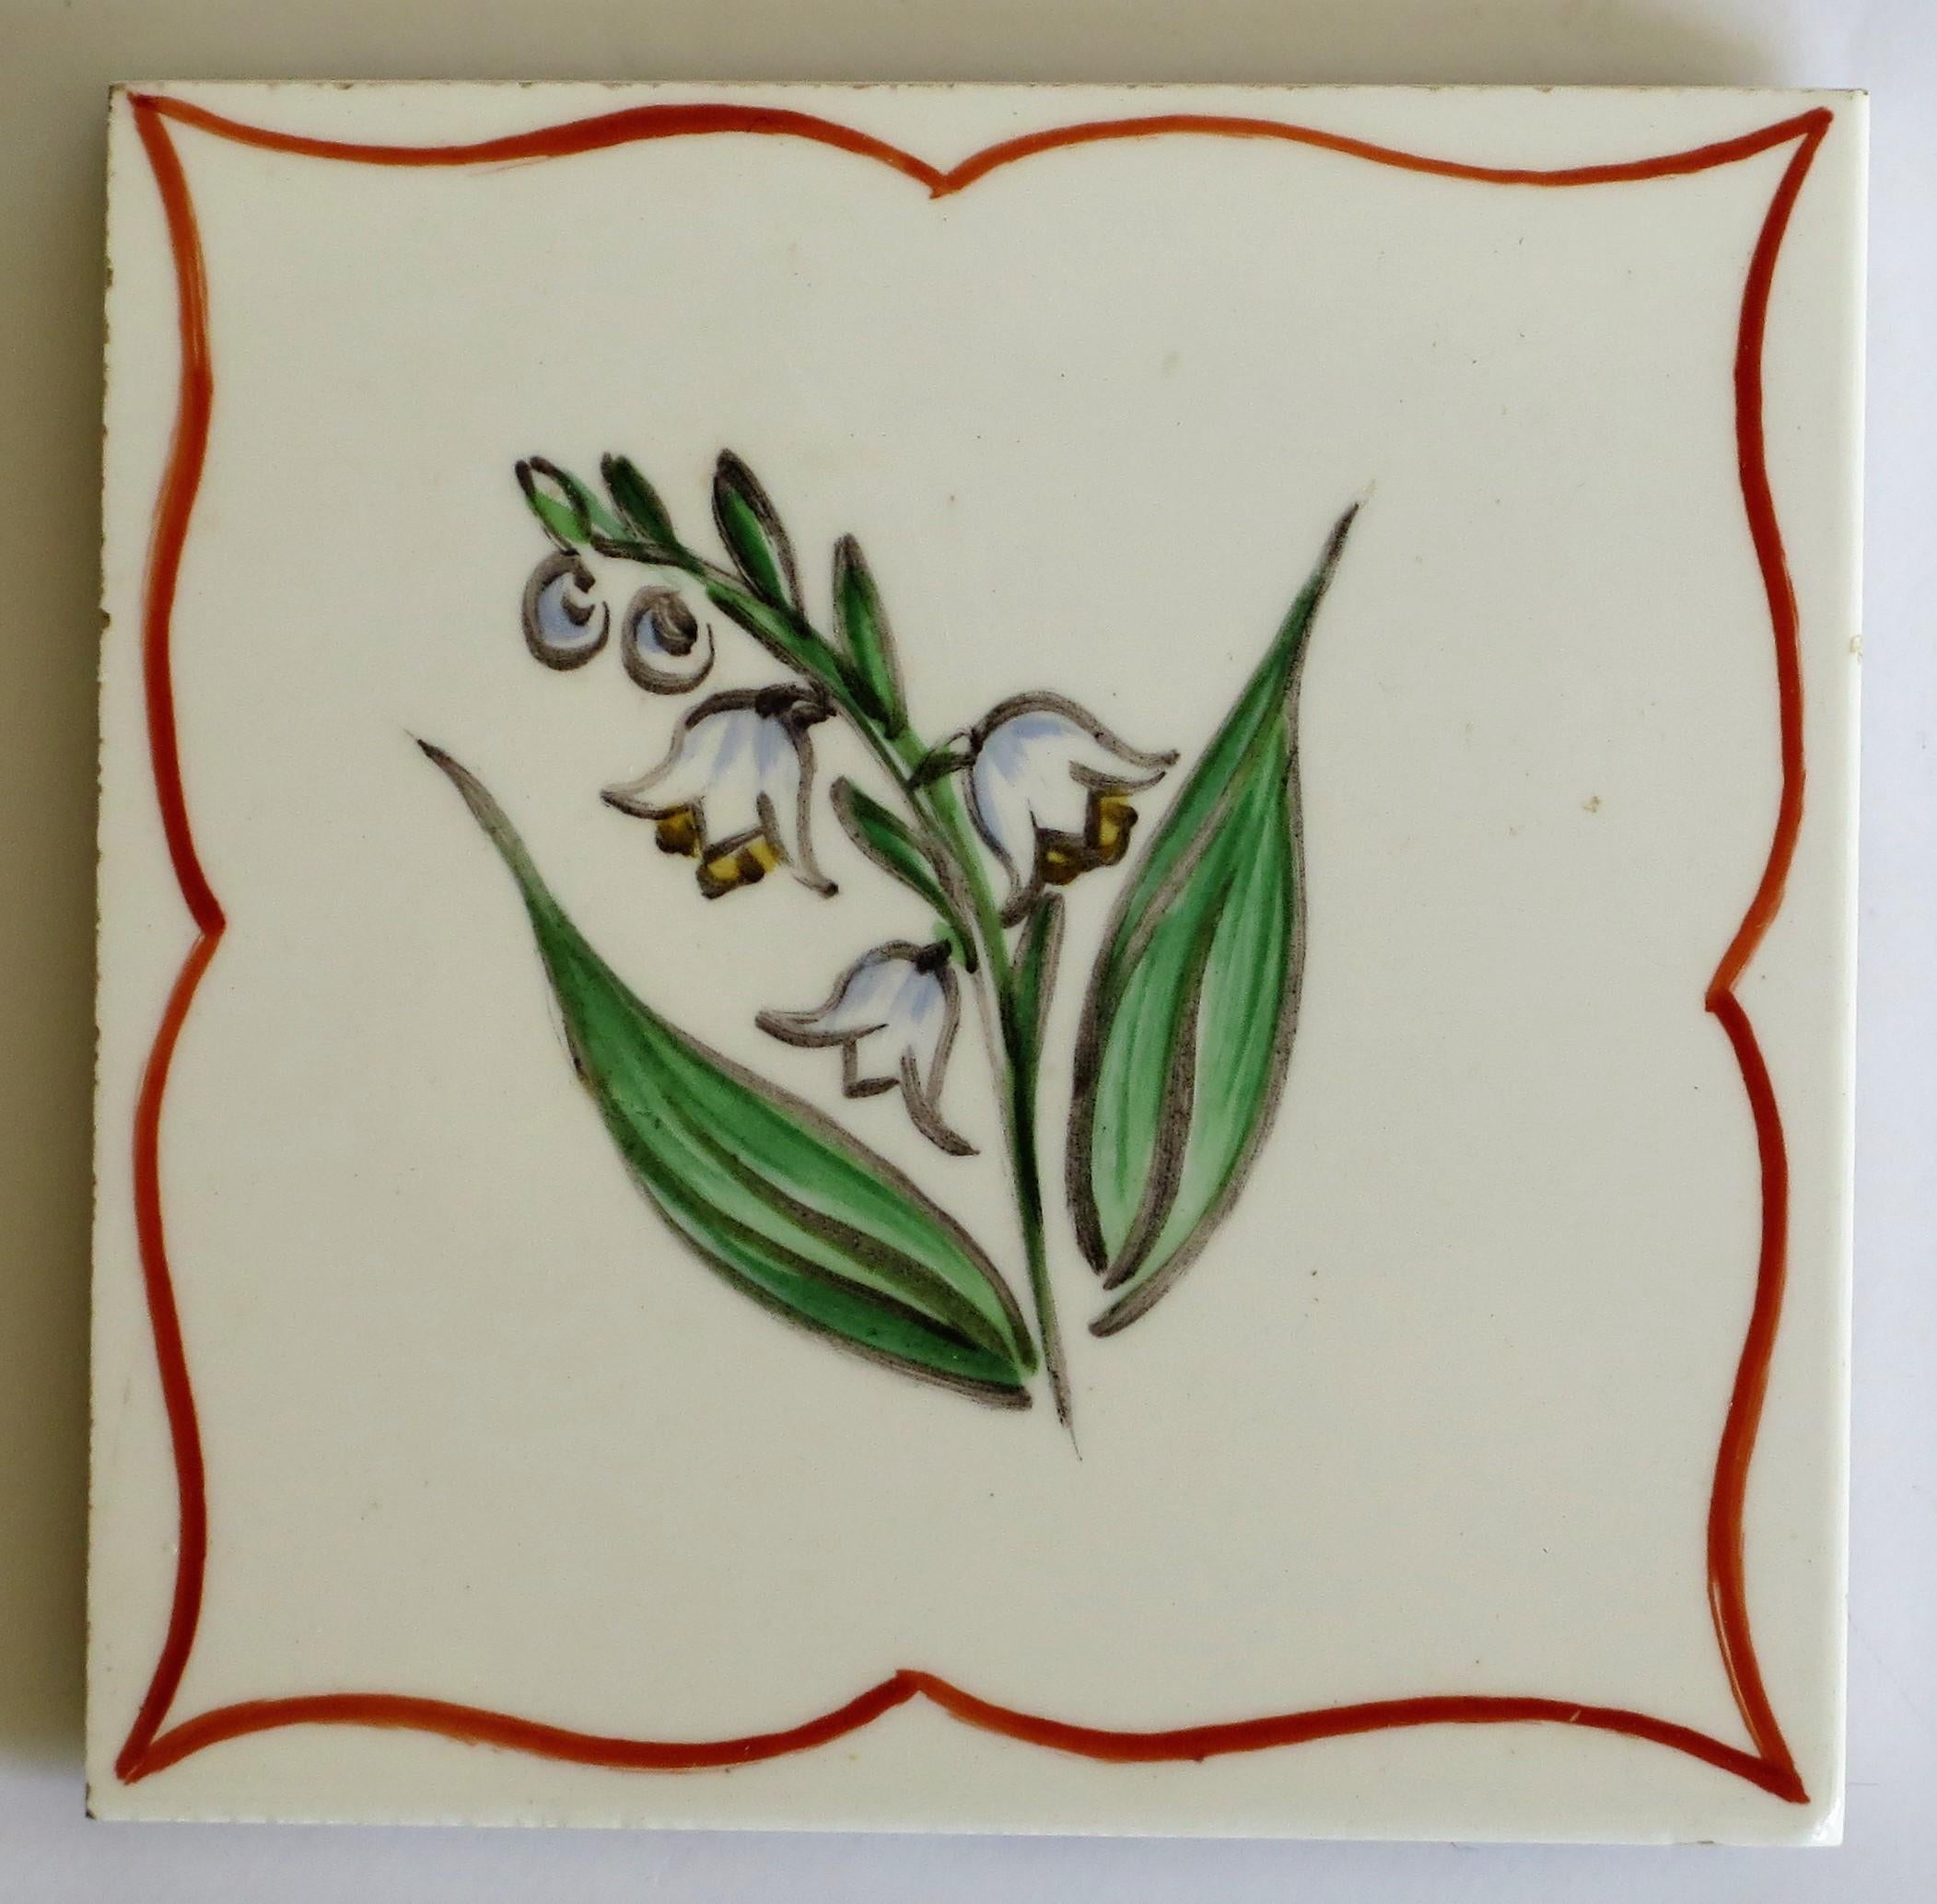 20th Century Set of Six Hand Painted Flowers Coasters / Tiles in Original Box, Denmark 1940s